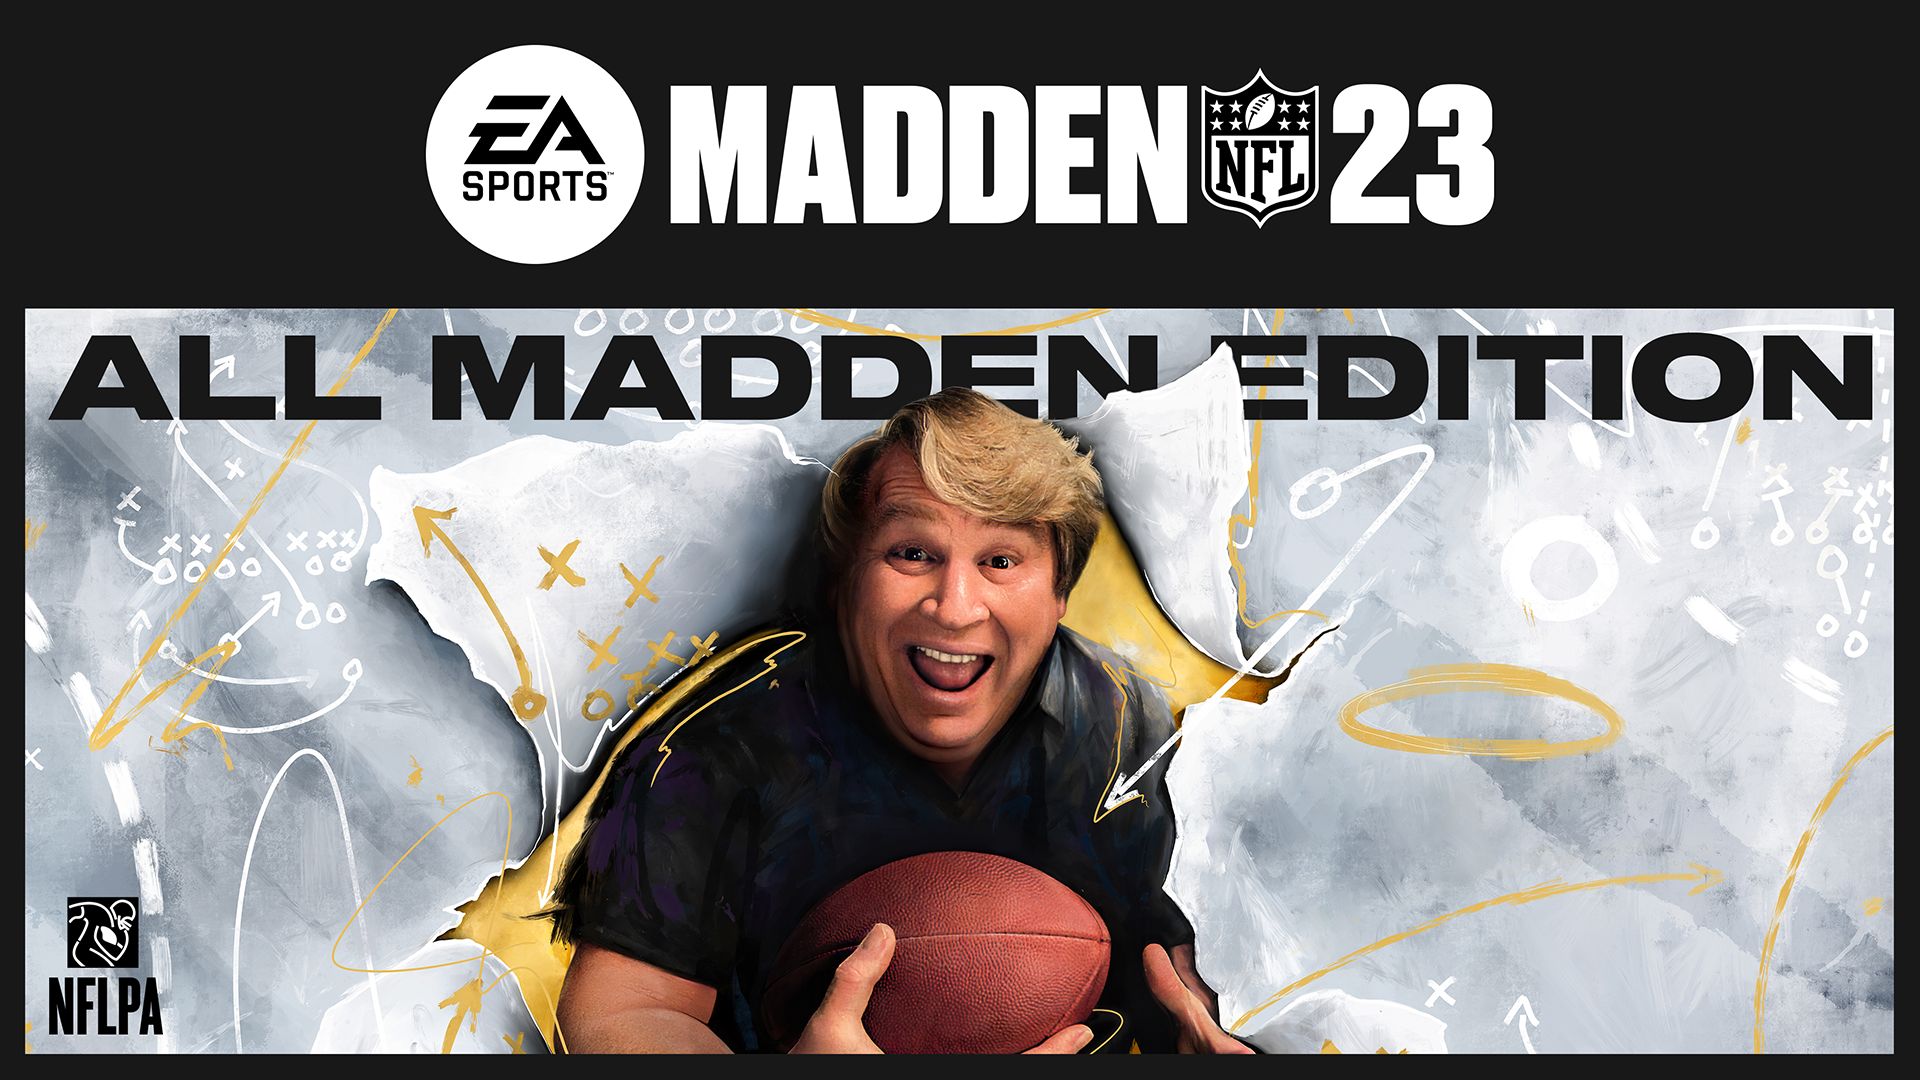 Welcome to Madden NFL 23